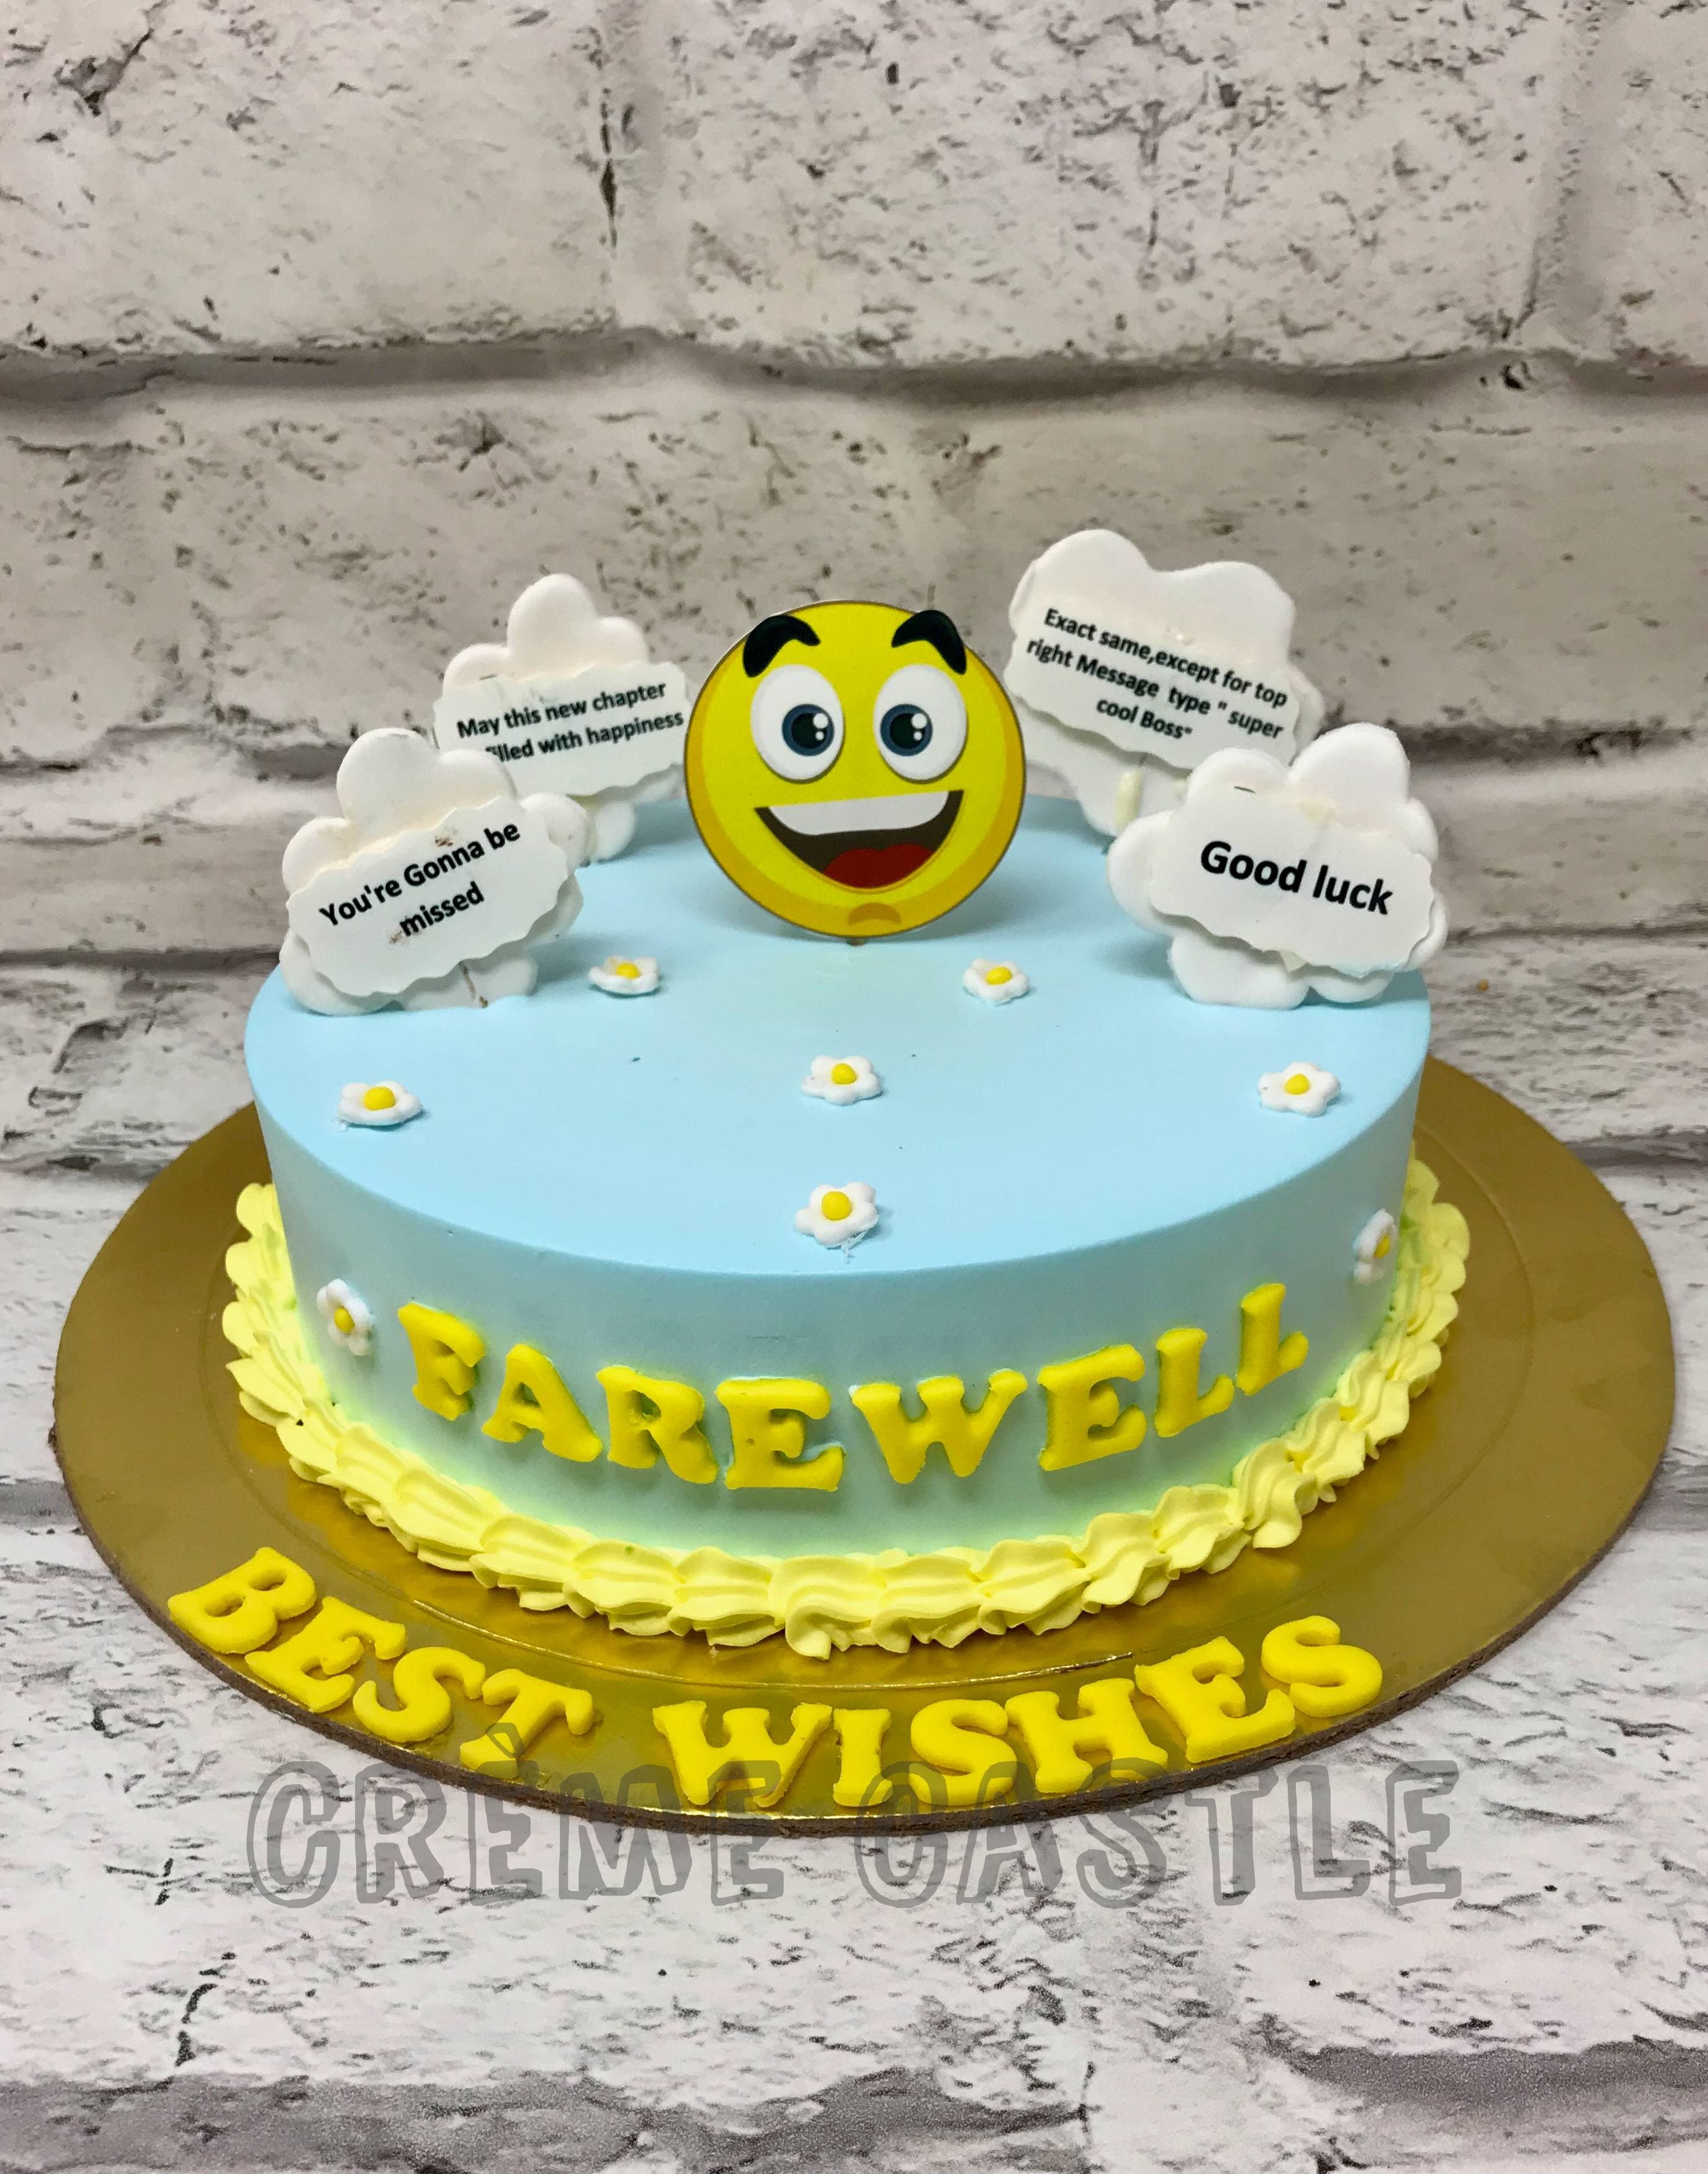 Farewell cake I made for a friend. | Goodbye cake, Cake quotes, Farewell  cake